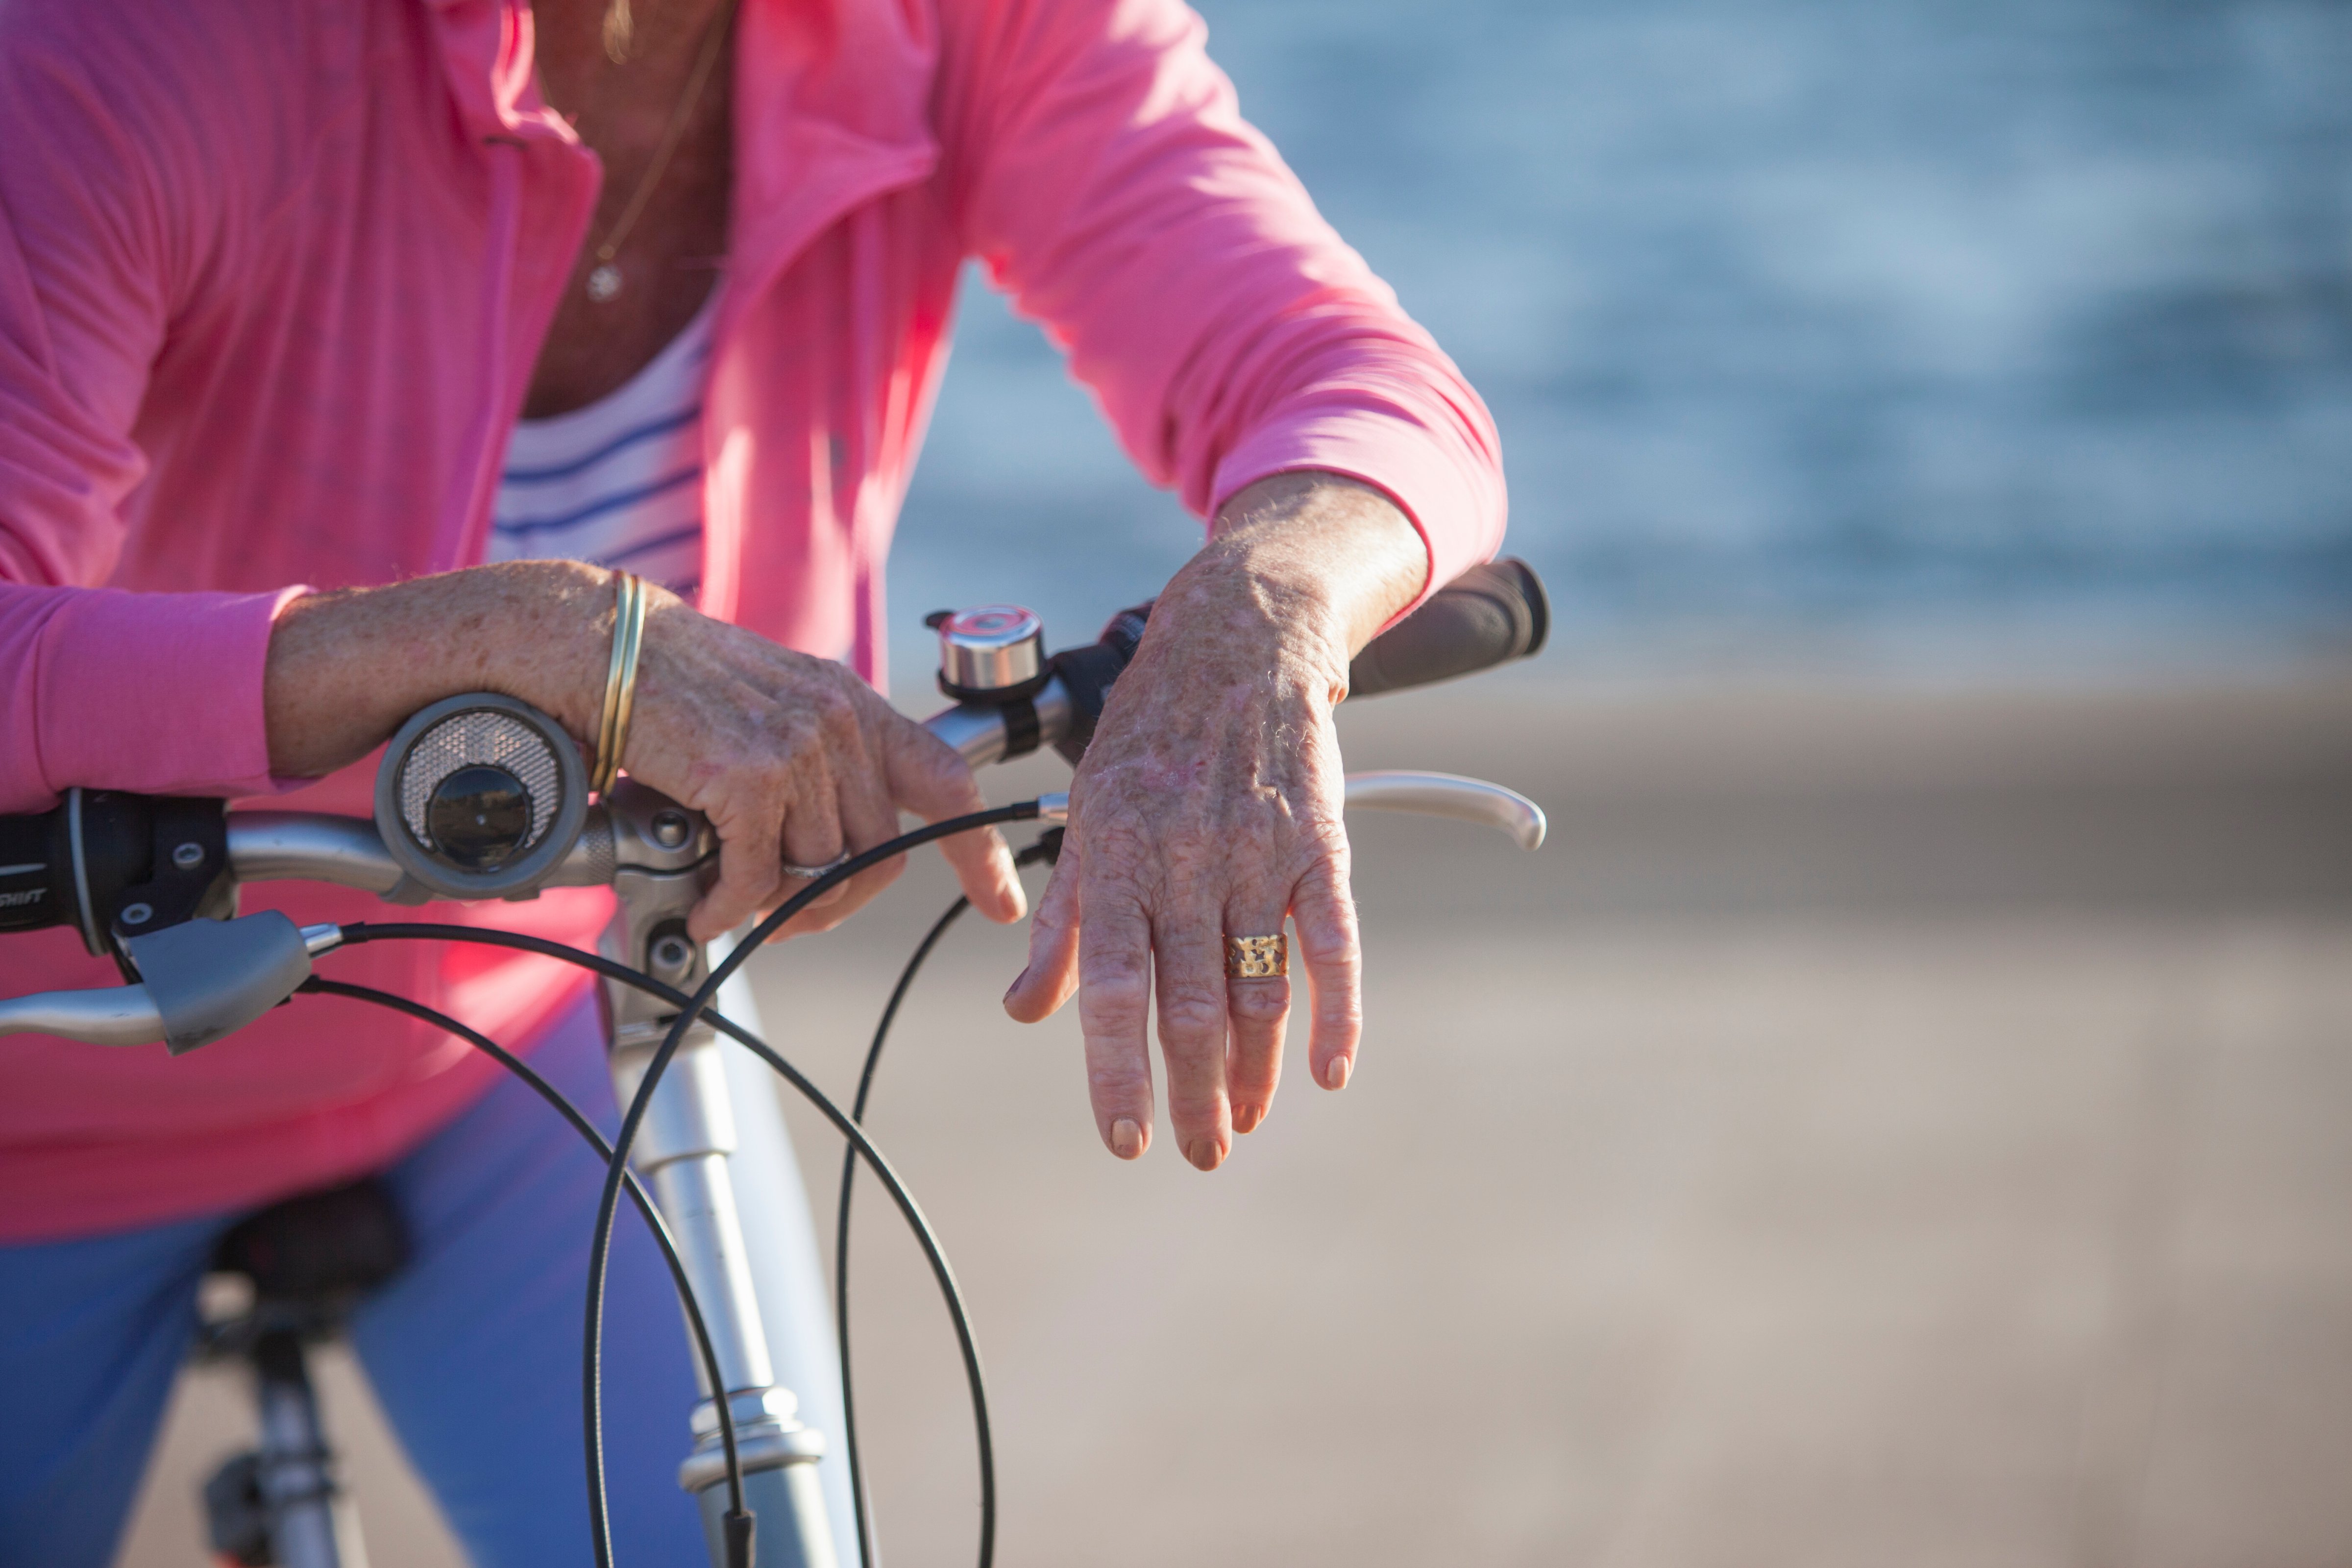 Senior woman on bicycle by beach